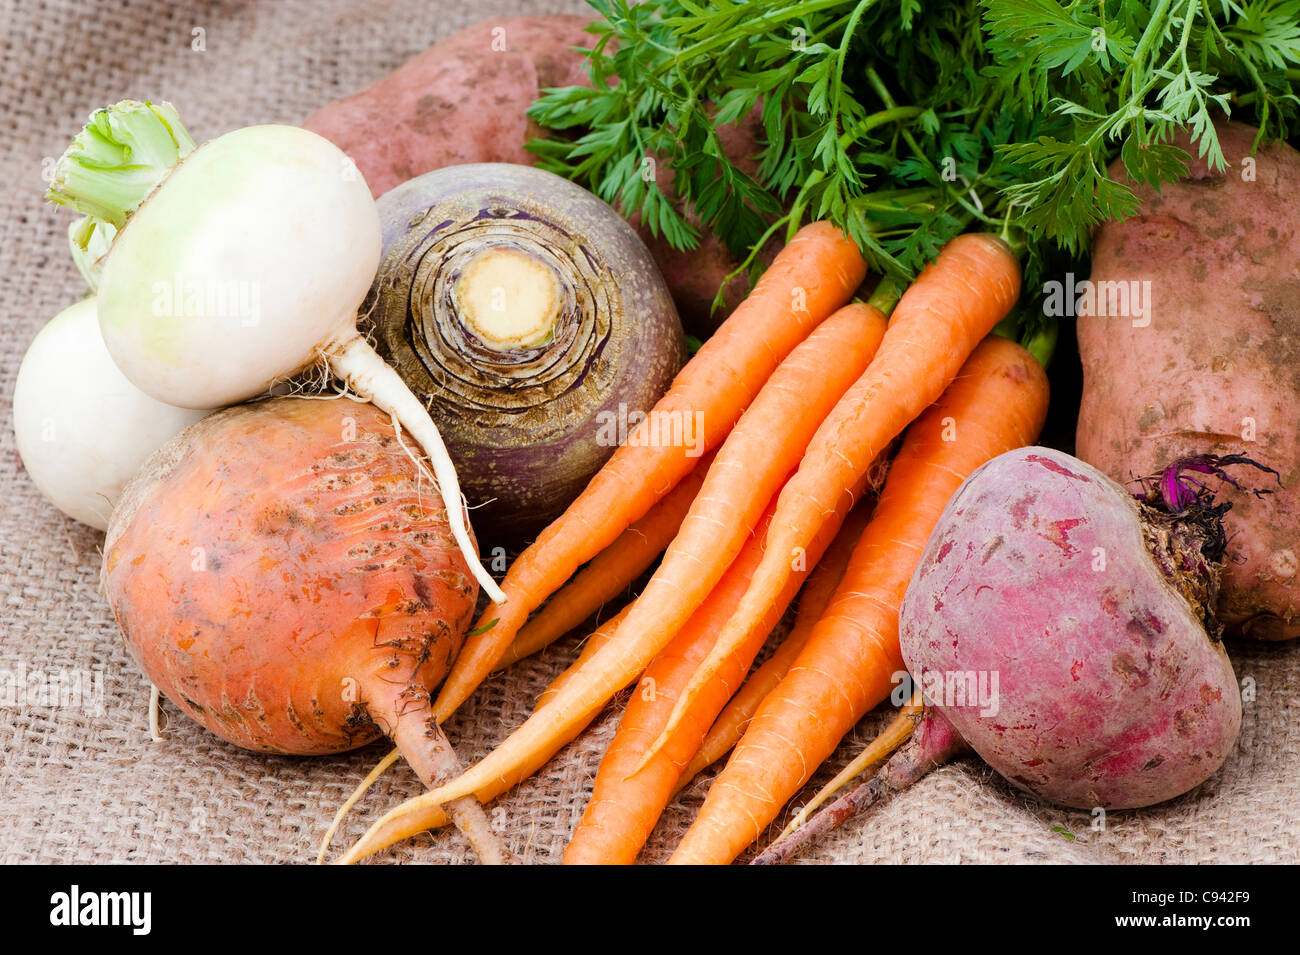 Mixed vegetables: turnips, carrots, swede, beetroots and potatoes Stock Photo